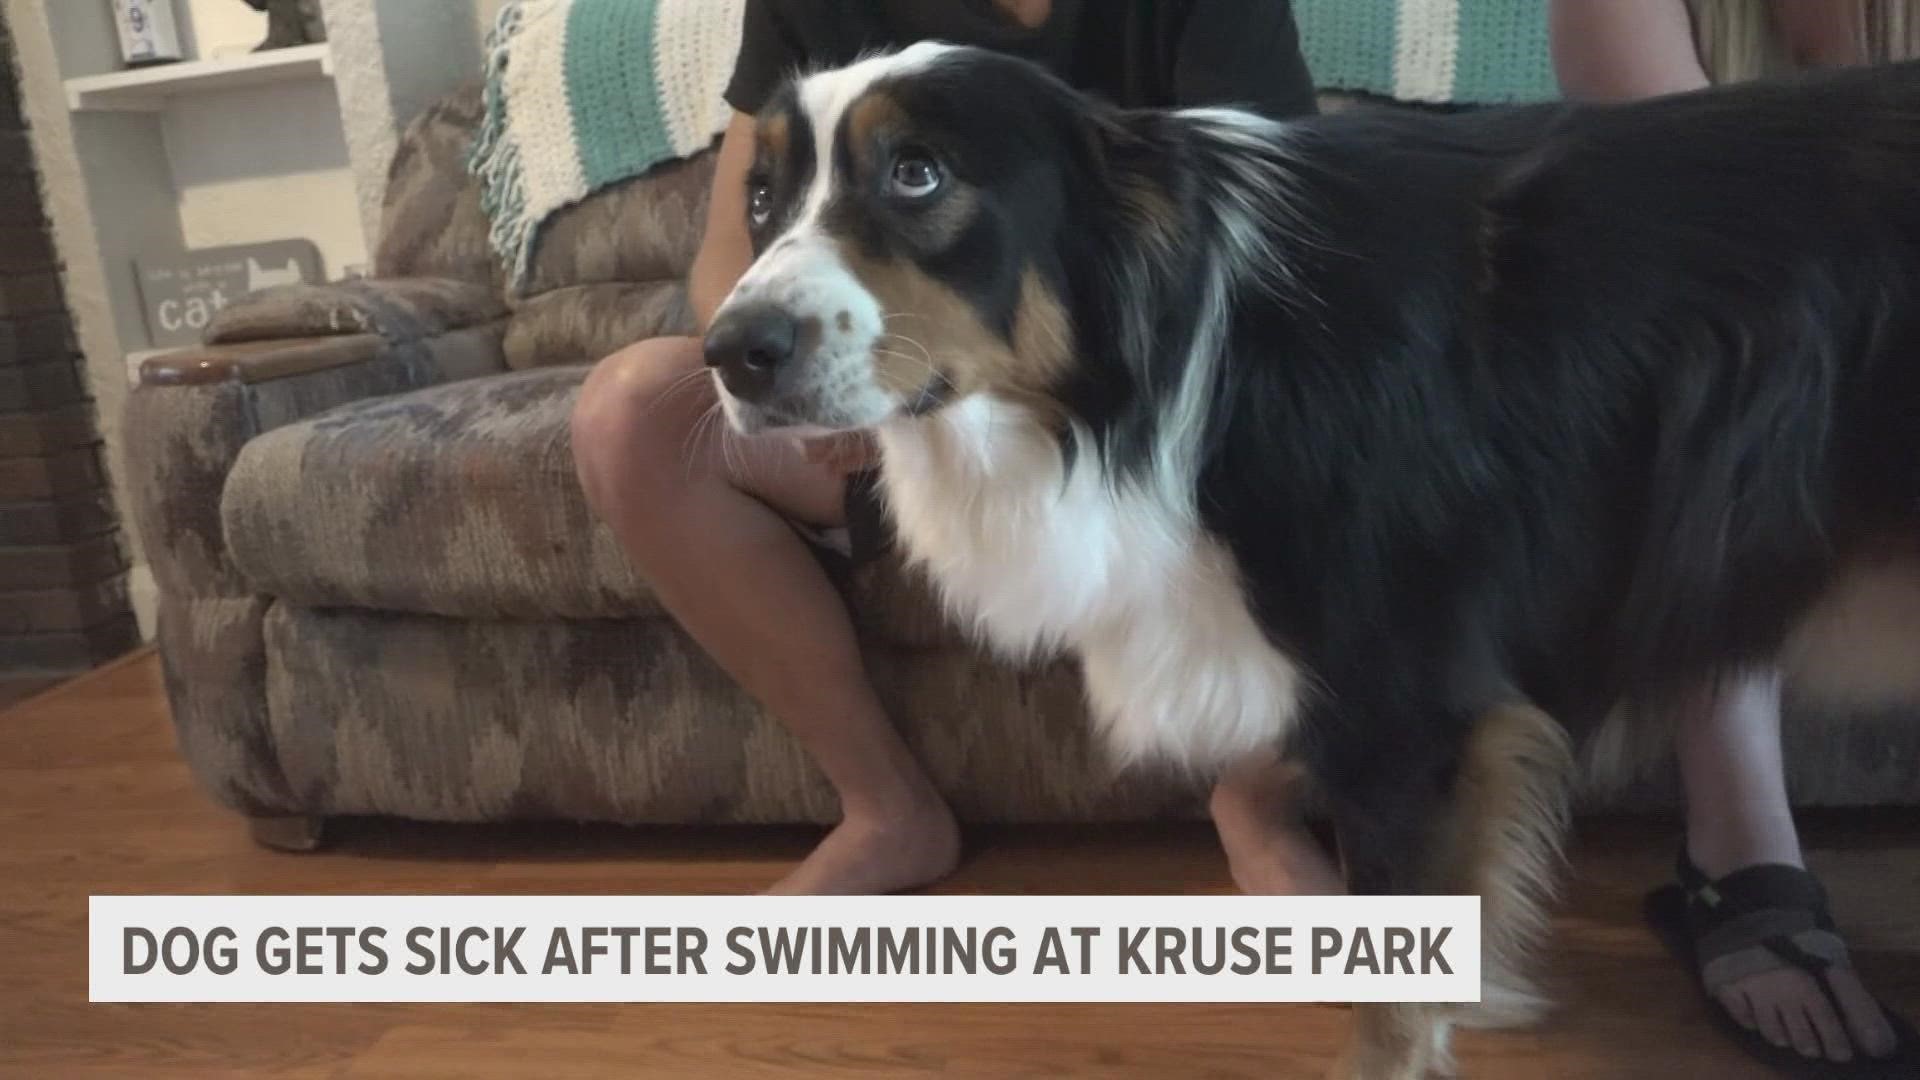 Benji, a 2-year-old Australian shepherd, was diagnosed with hemorrhagic gastroenteritis after swimming at Kruse Park.